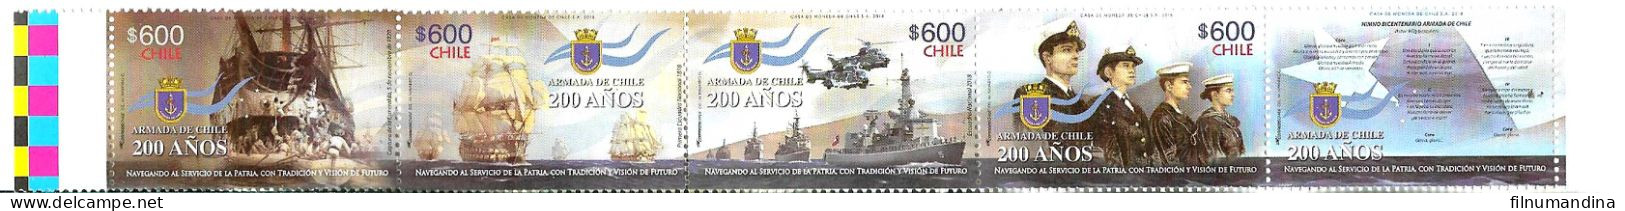 #2612 CHILE 2018 MILITARIA CHILEAN NAVY 200° ANIV SHIPS AIRPLANES STRIP WITH LABEL YV 2134-7 MNH - Chile